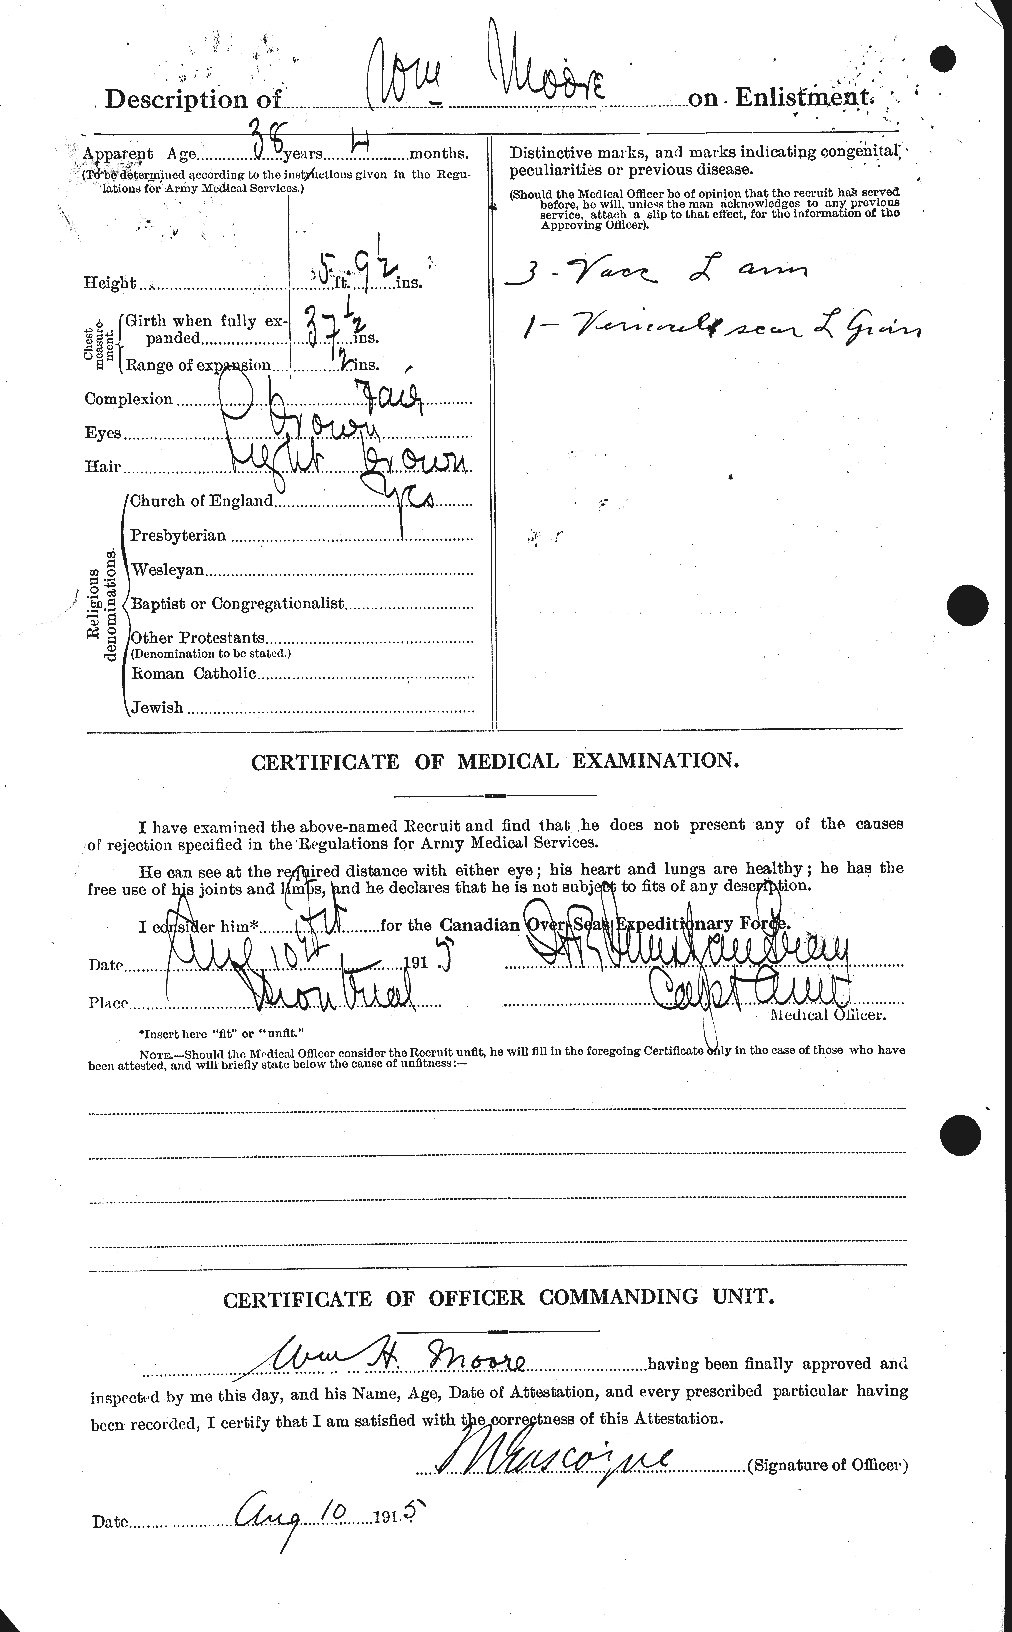 Personnel Records of the First World War - CEF 505753b